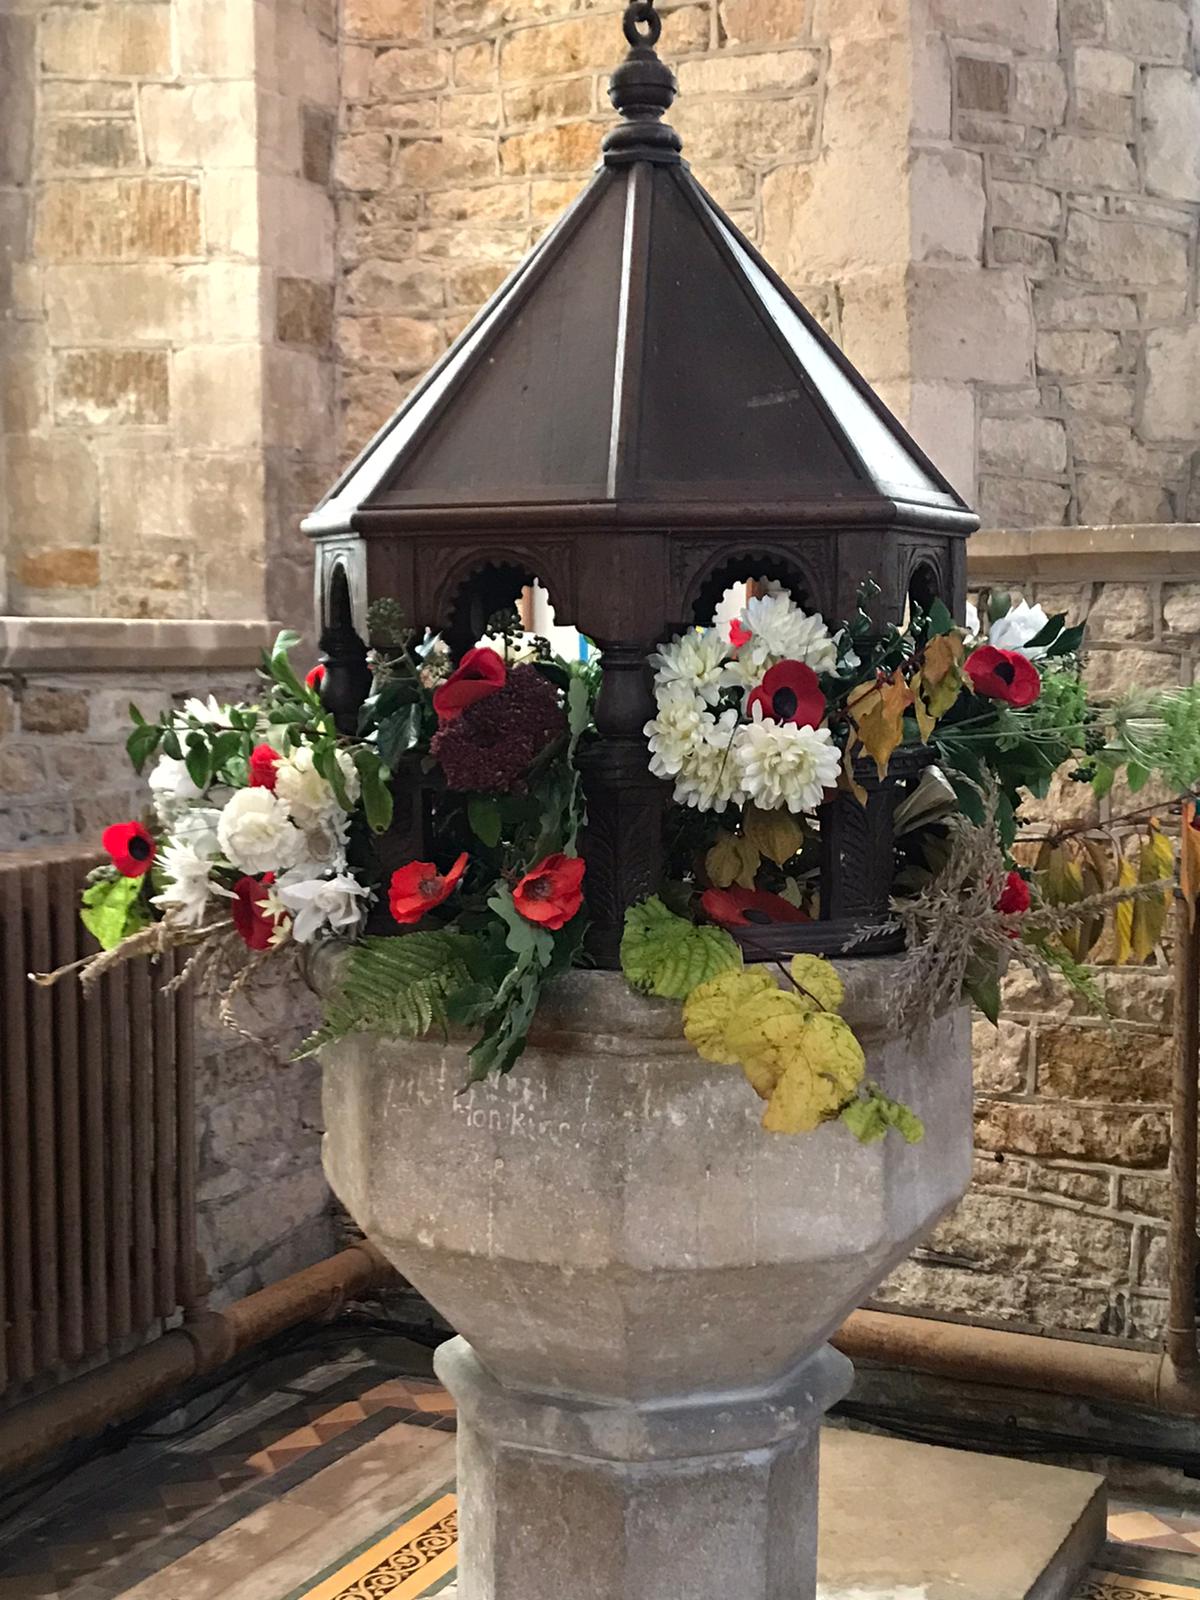 St Peter's Font - decorated in poppies for Remembrance